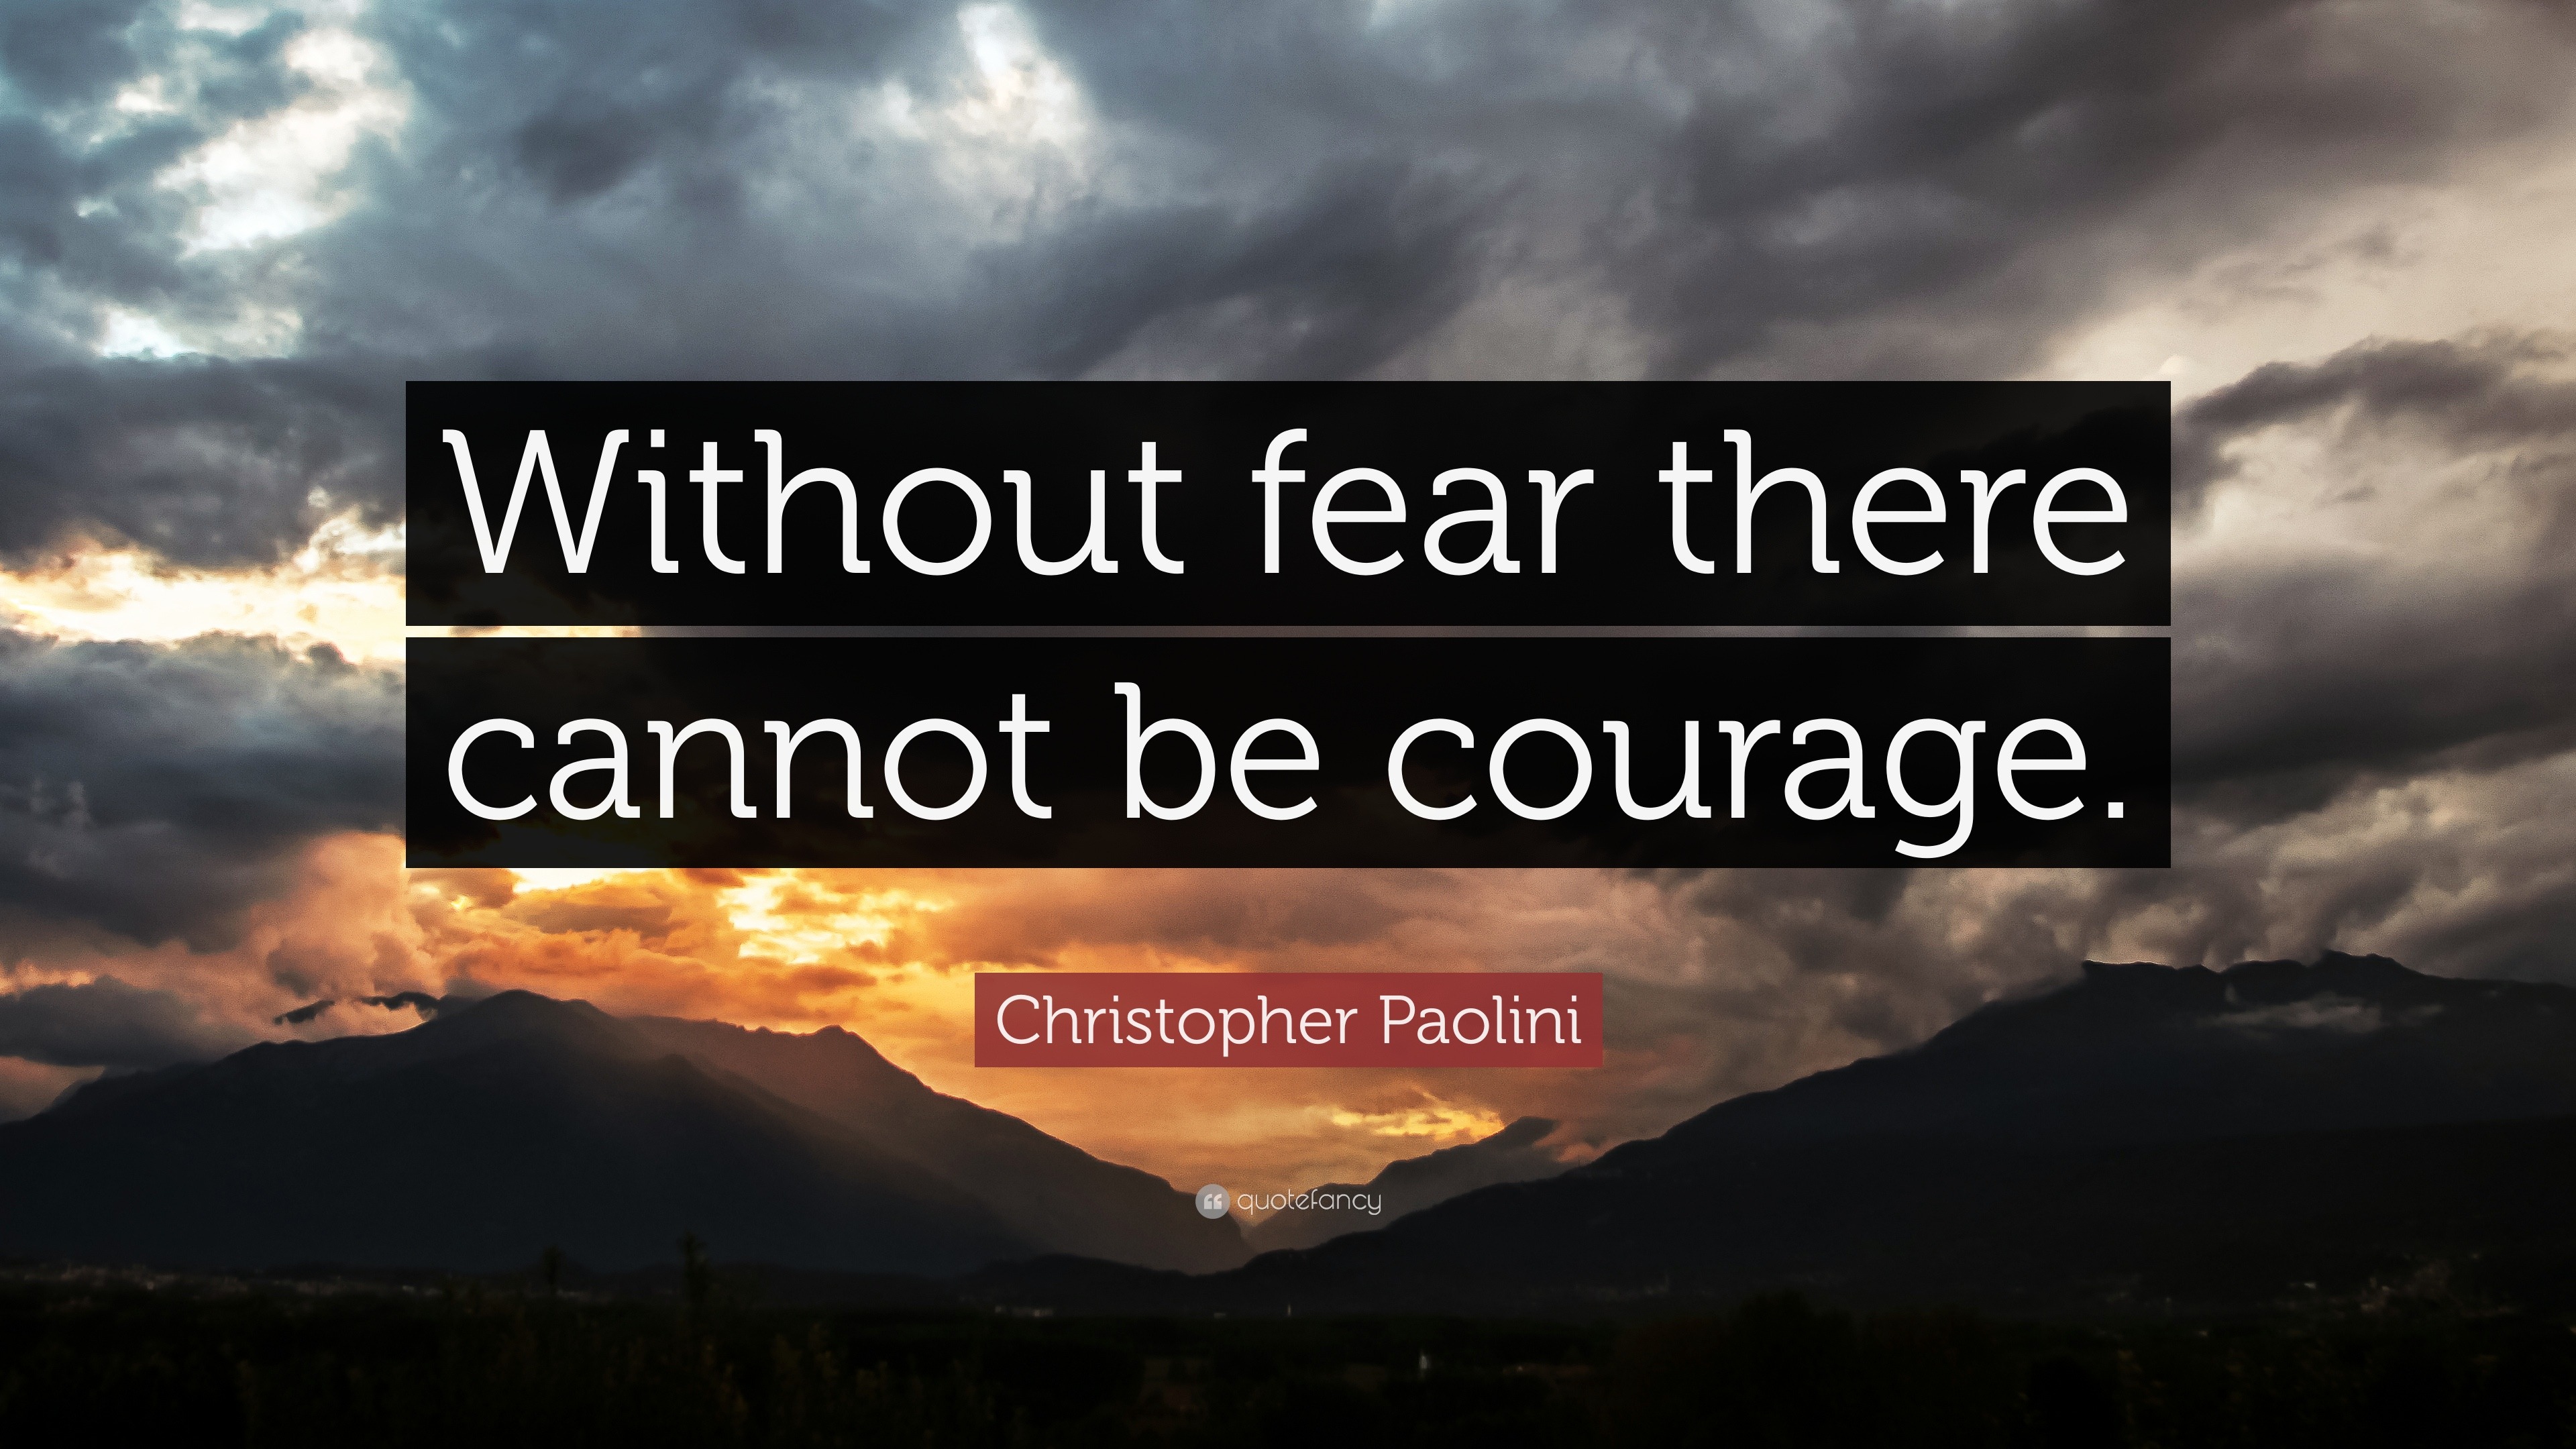 Christopher Paolini Quote “Without fear there cannot be courage ”